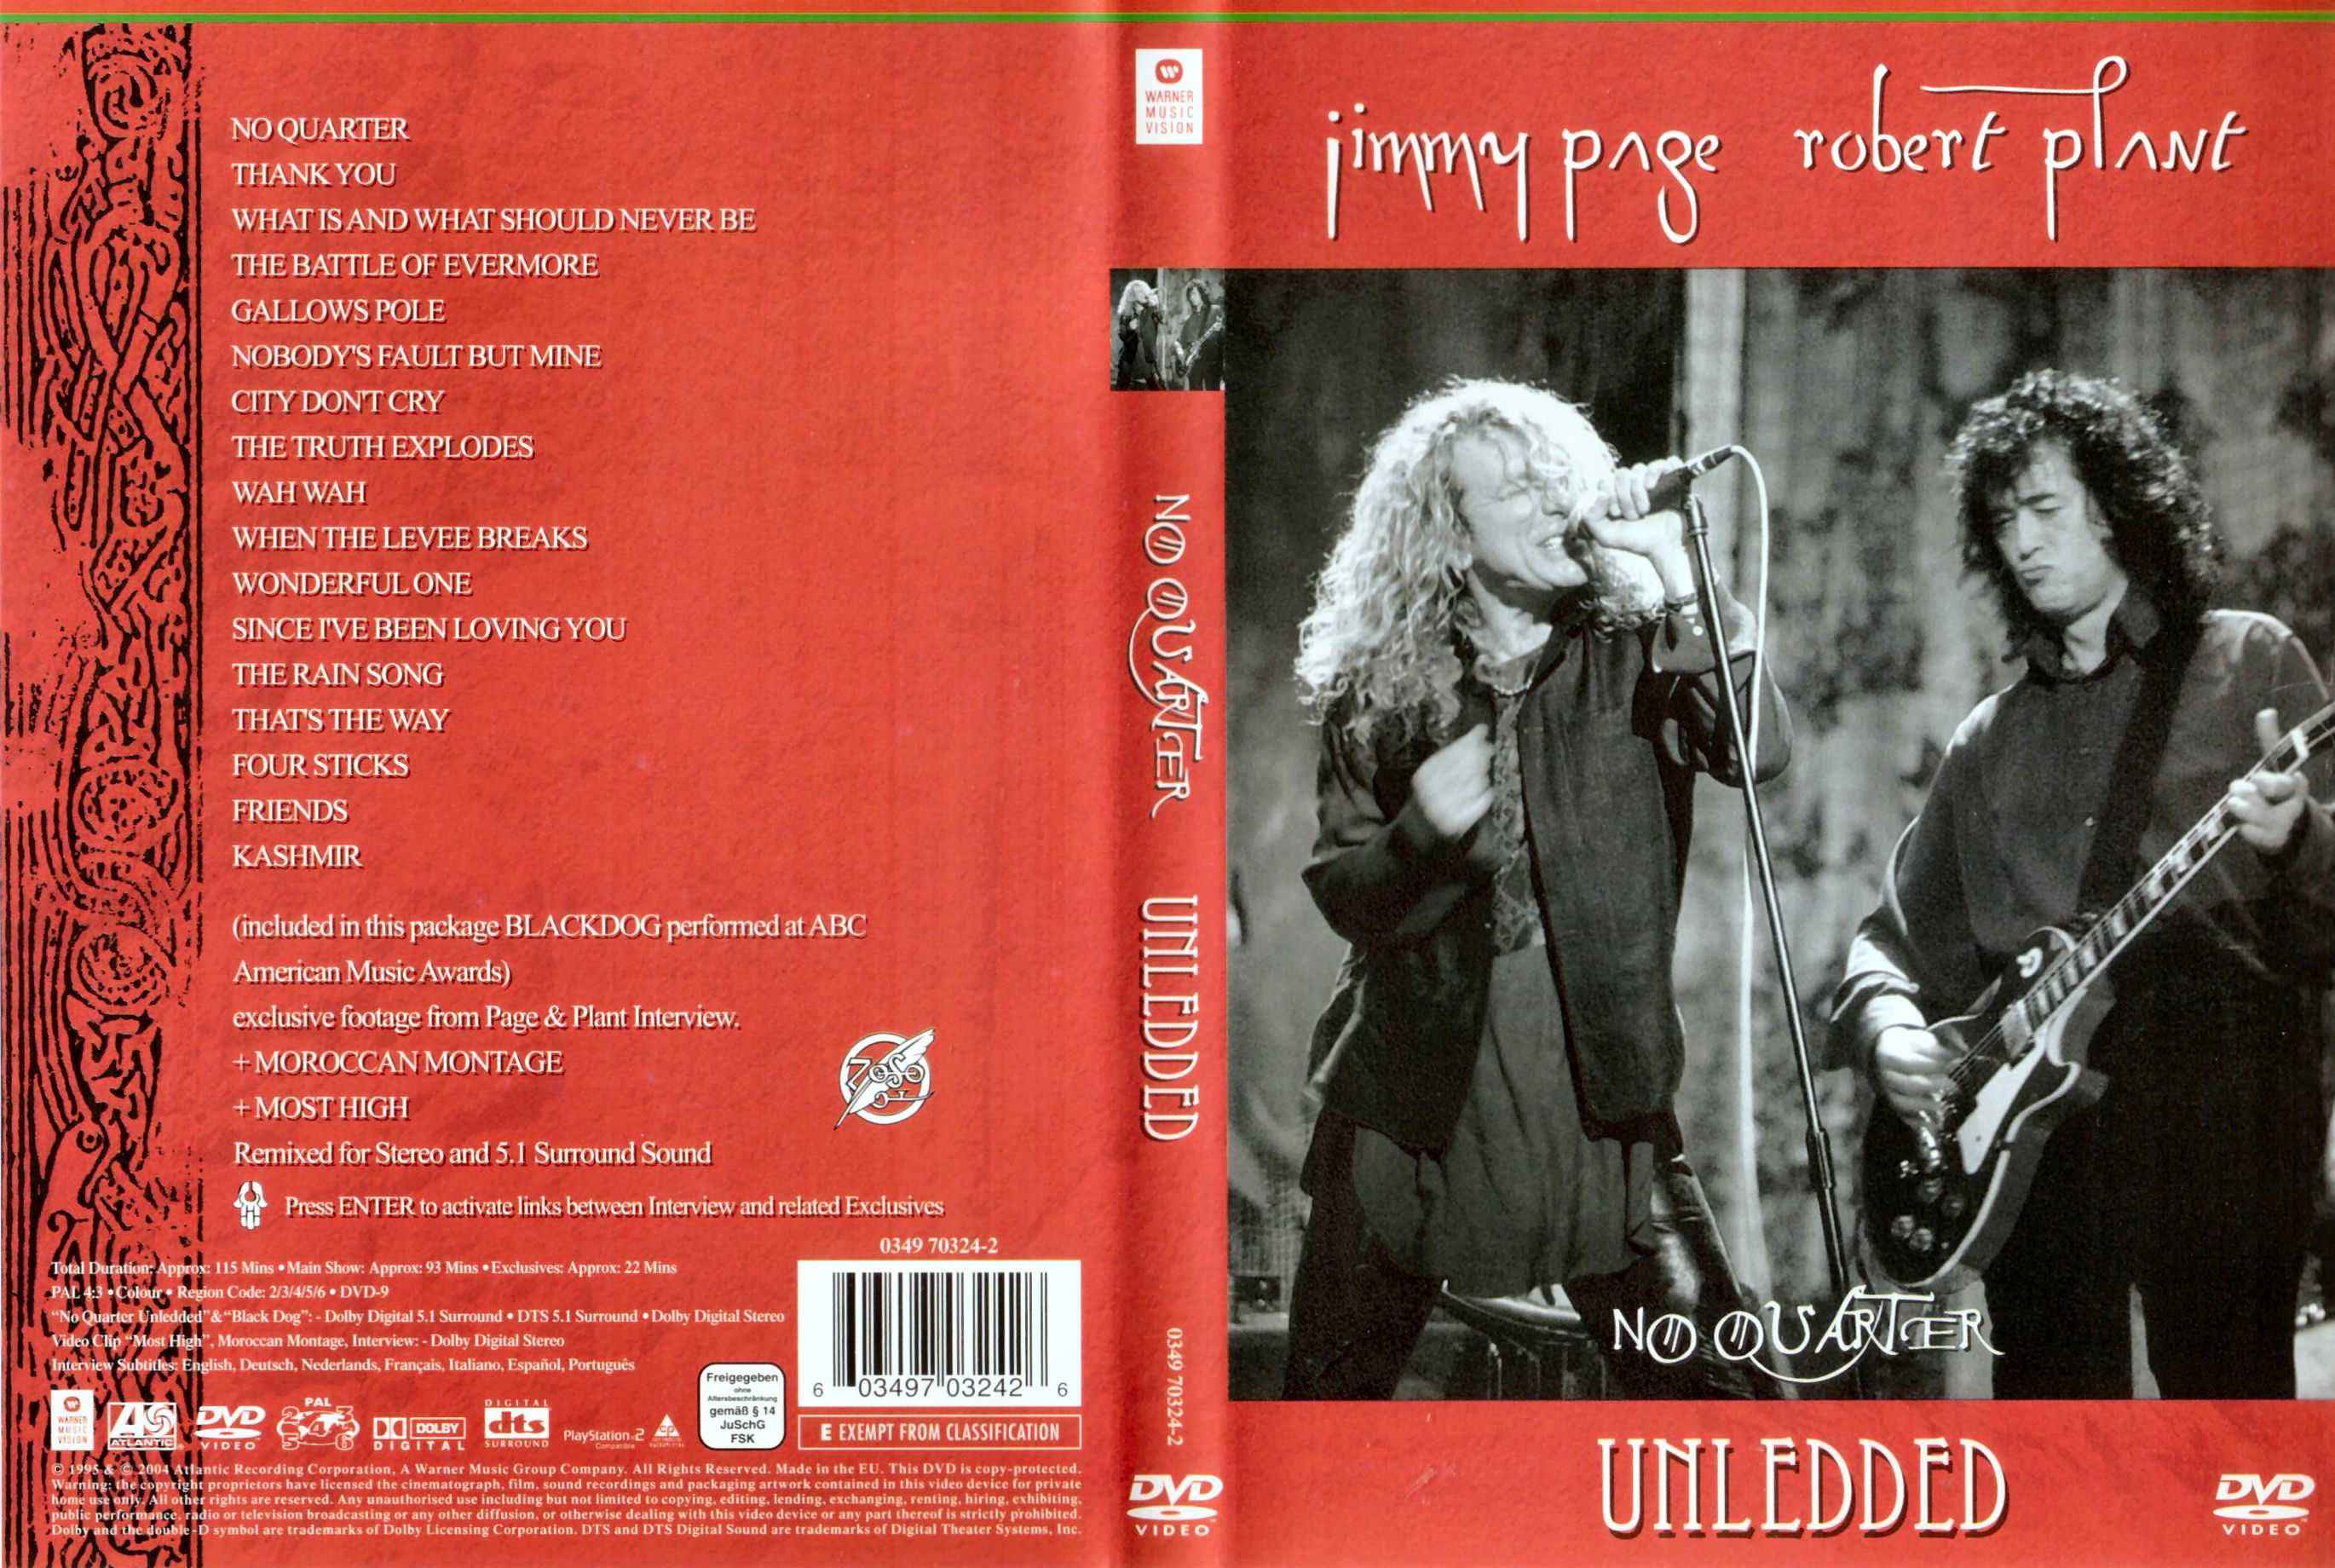 Jaquette DVD No quarter Unledded (Jimmy Page - Robert Plant)